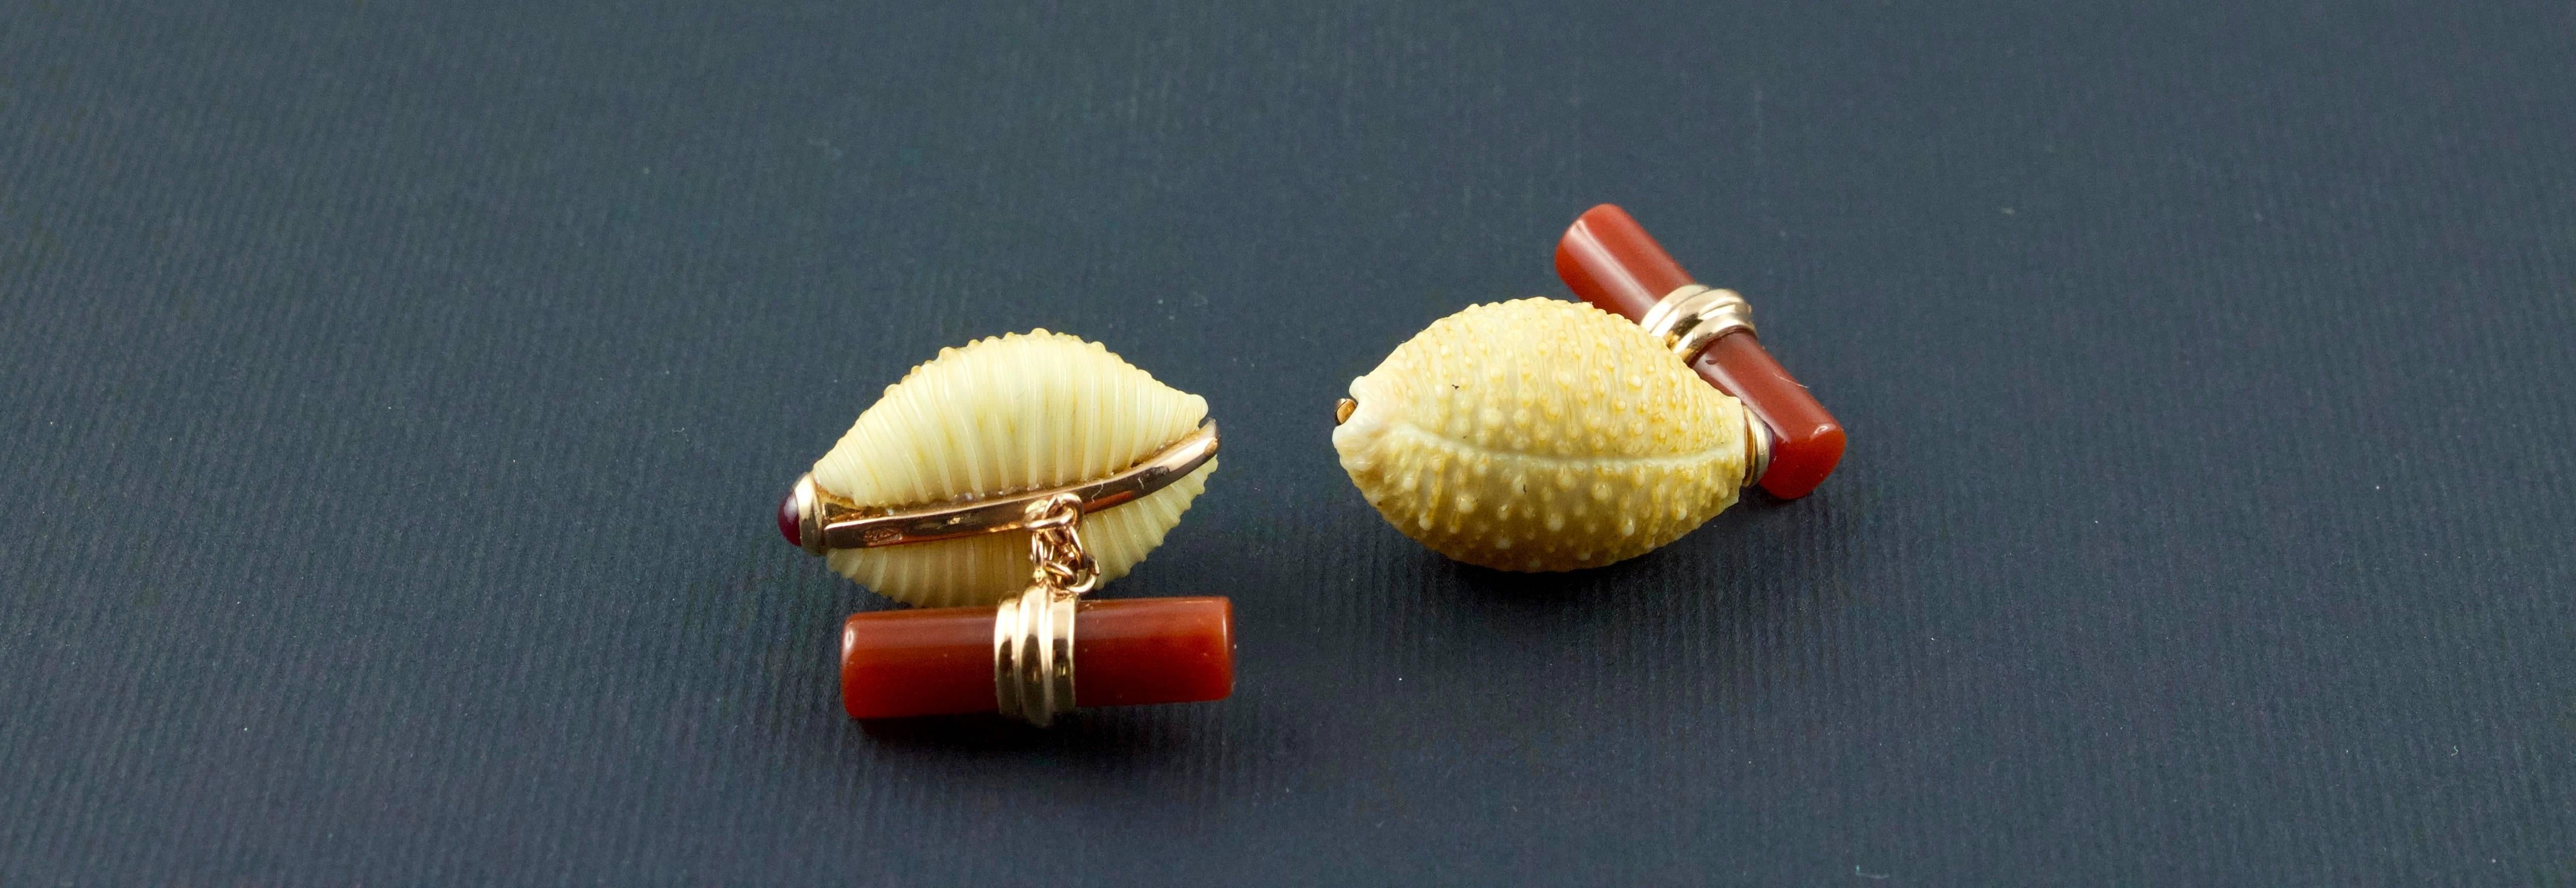 This striking pair of cufflinks features a front face made of a single natural shell, the dorsum surface is pale yellowish with a thin longitudinal line in the middle and many small round protuberances . The top of the shell is adorned with a ruby